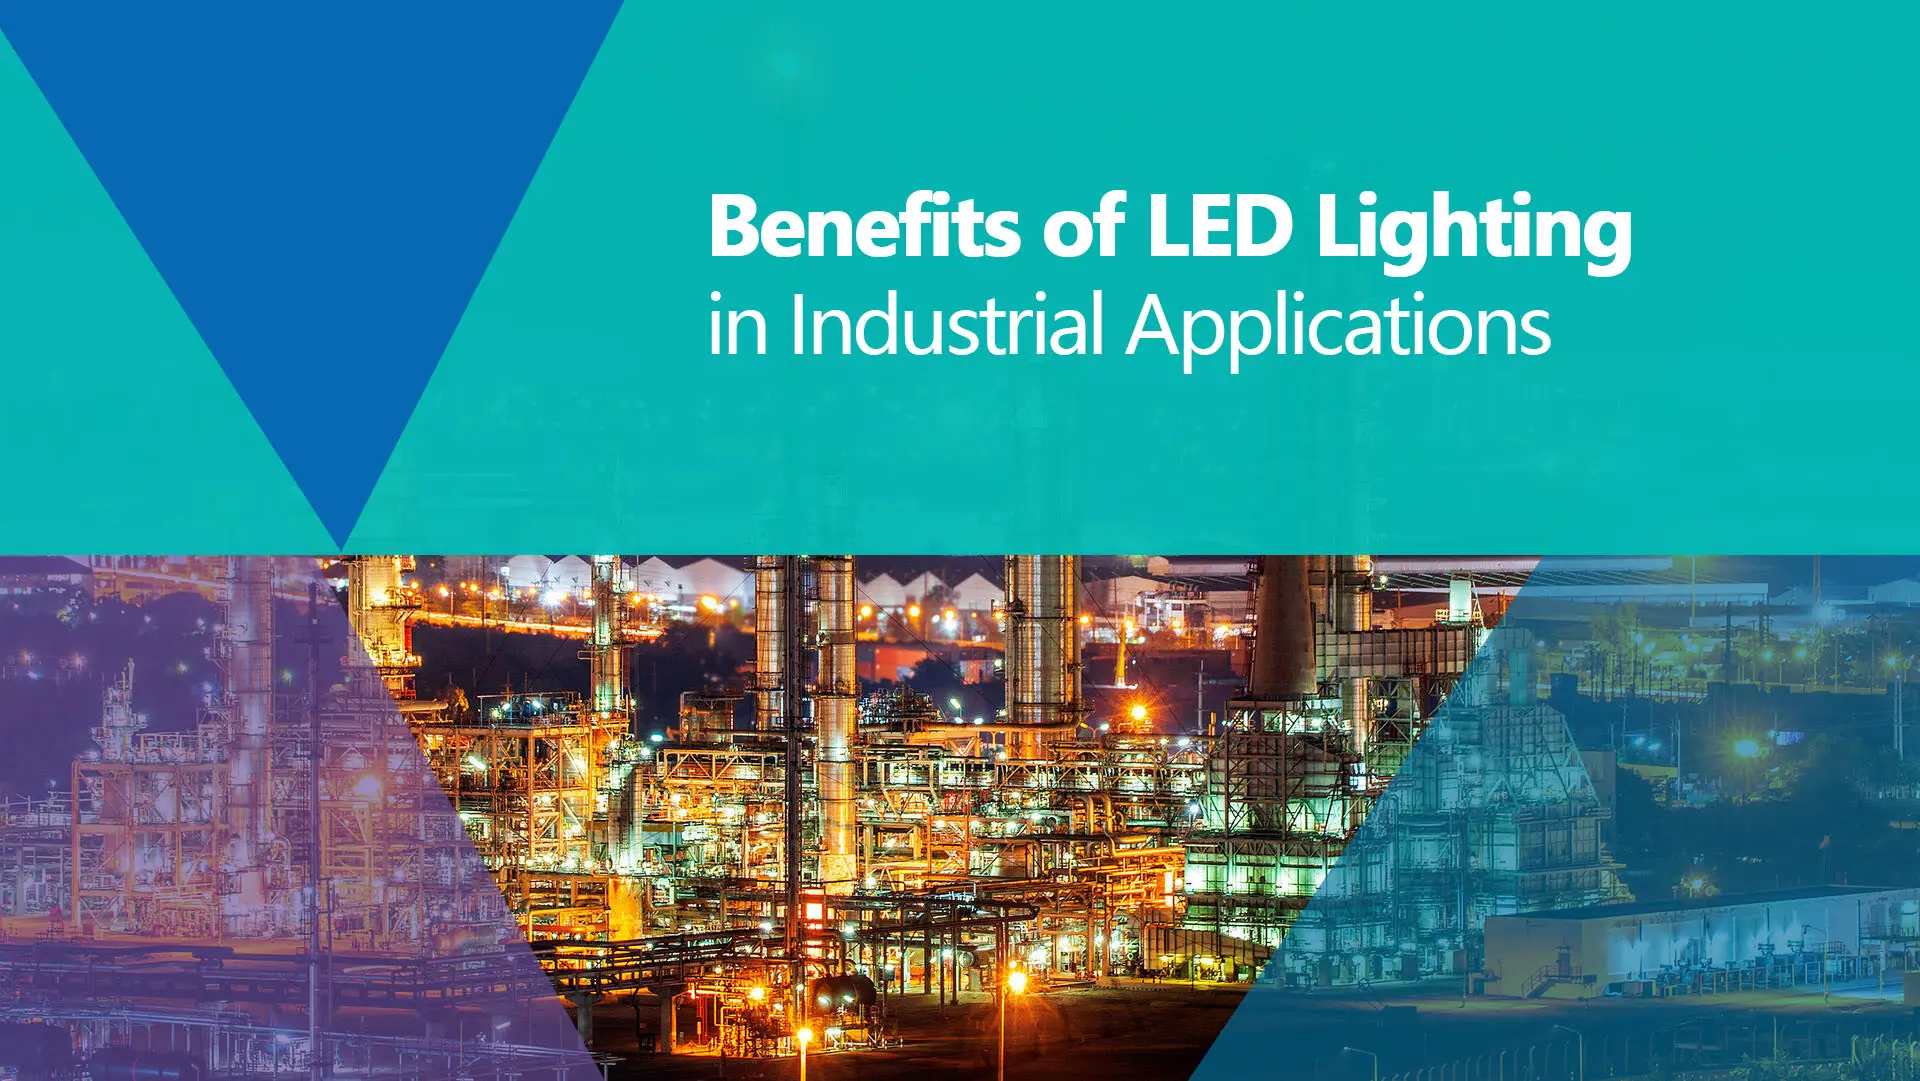 Benefits of LED Lighting in Industrial Applications